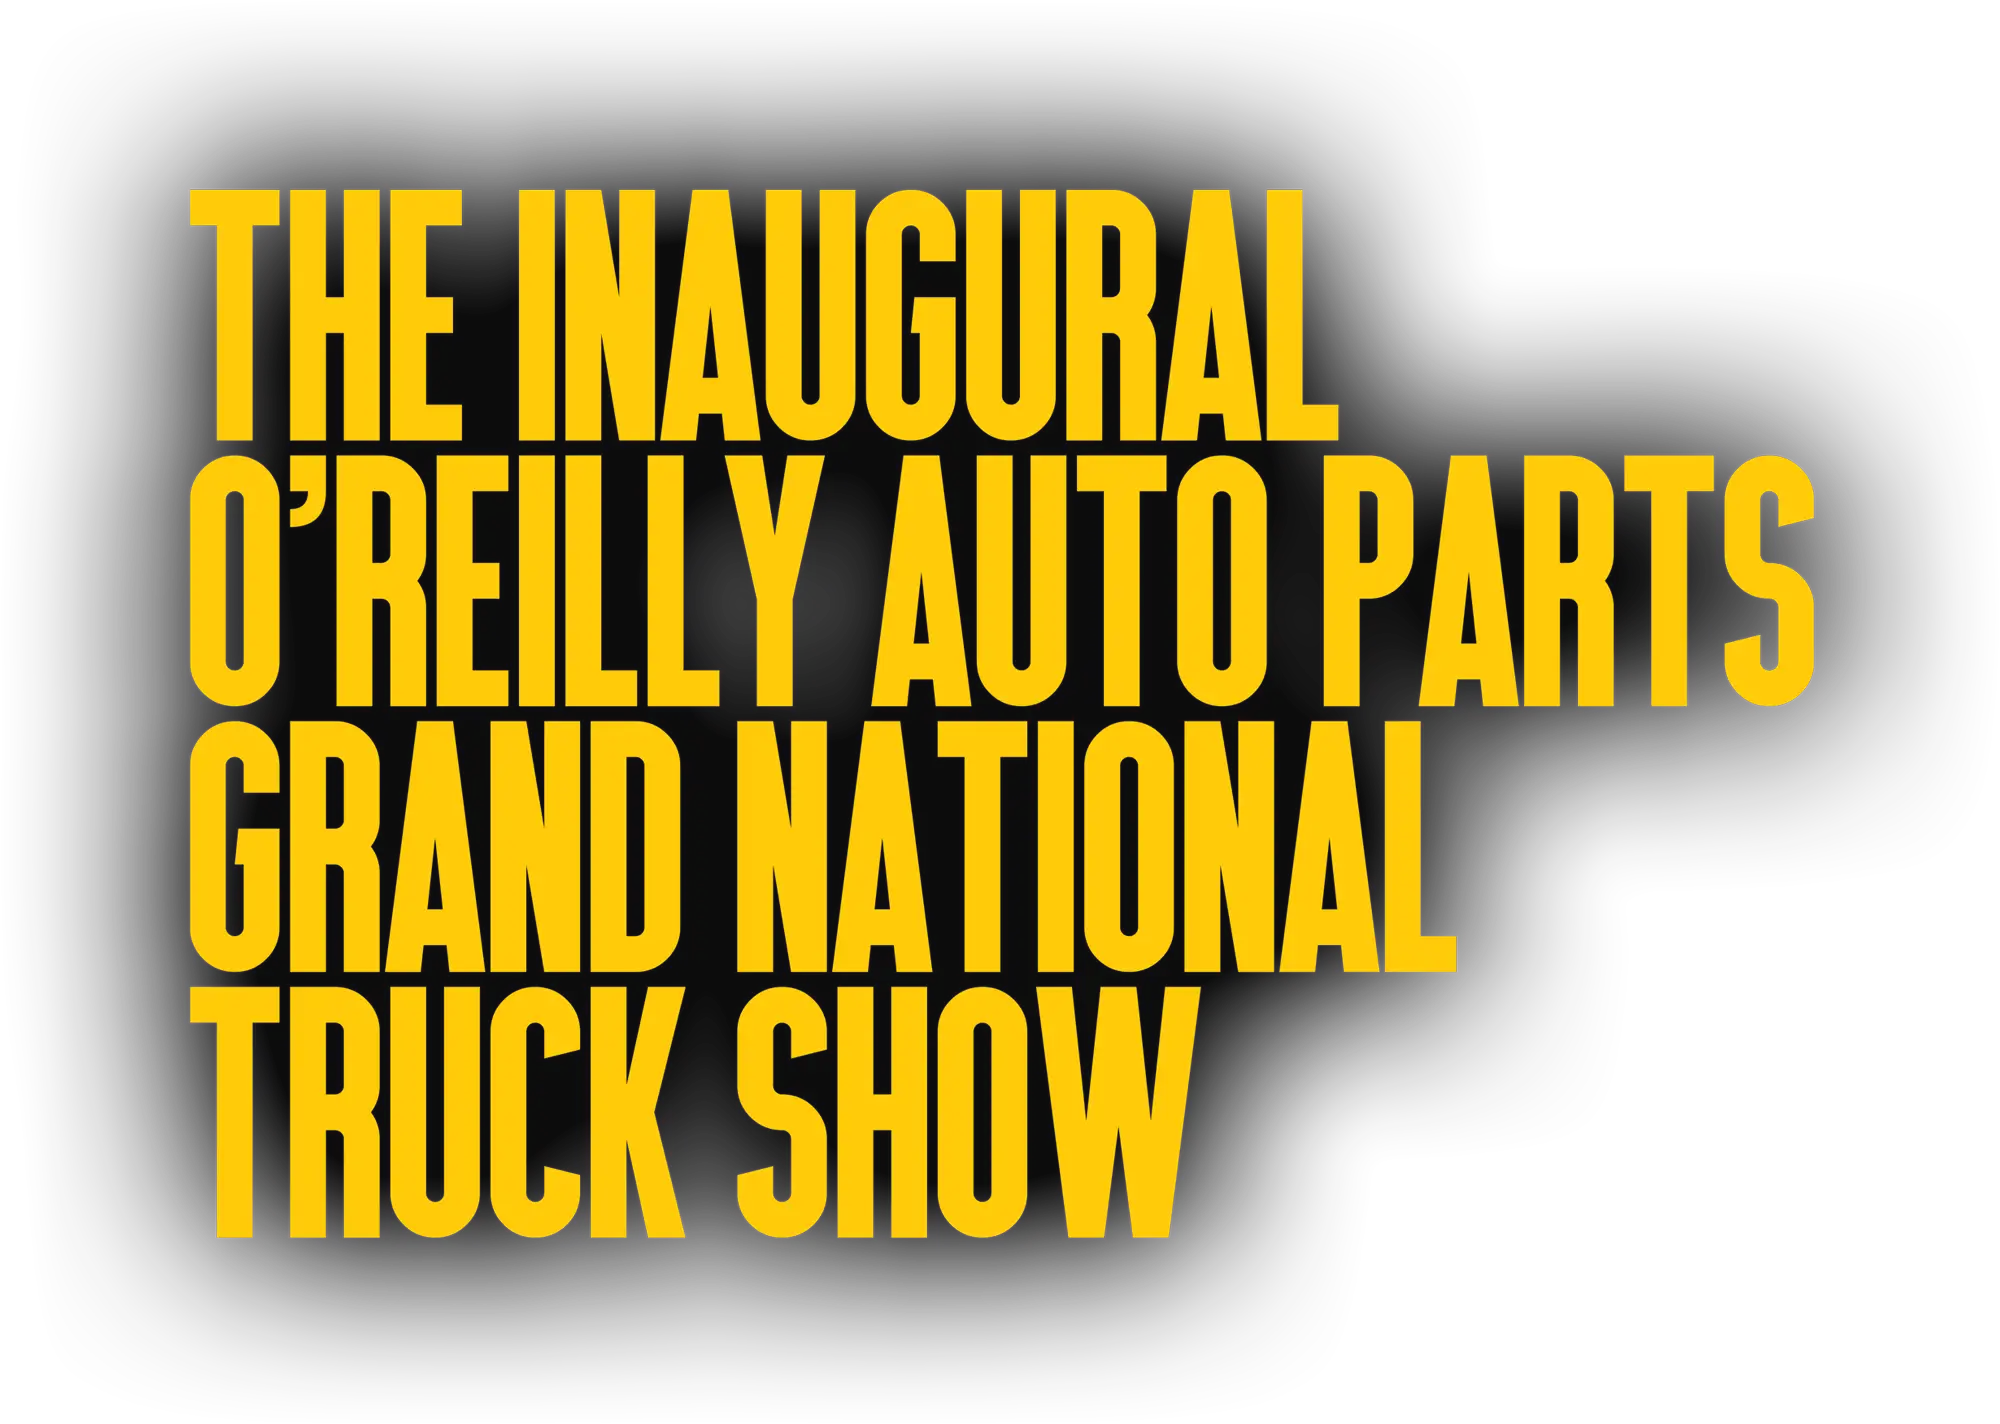 The Inaugural O'Reilly Auto Parts Grand National Truck Show typography